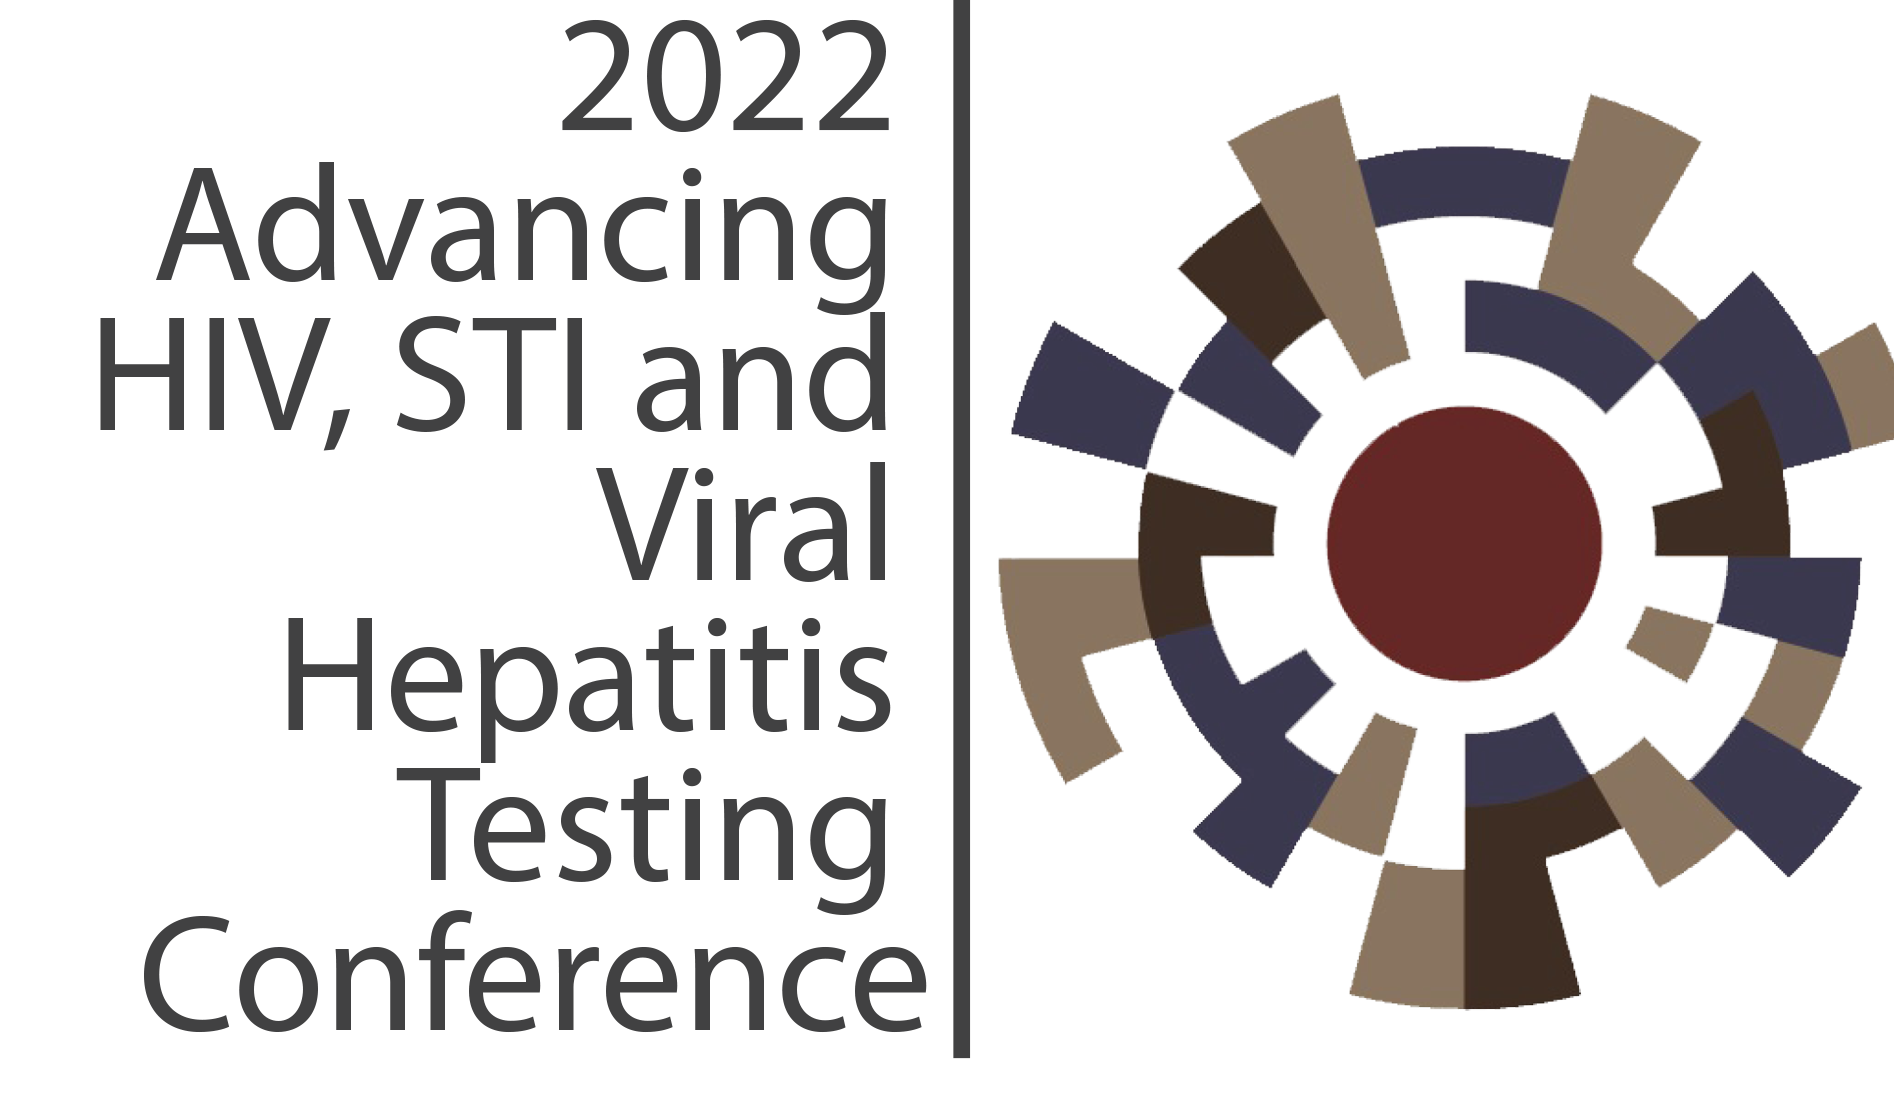 2022 Advancing HIV, STI and Viral Hepatitis Testing Conference